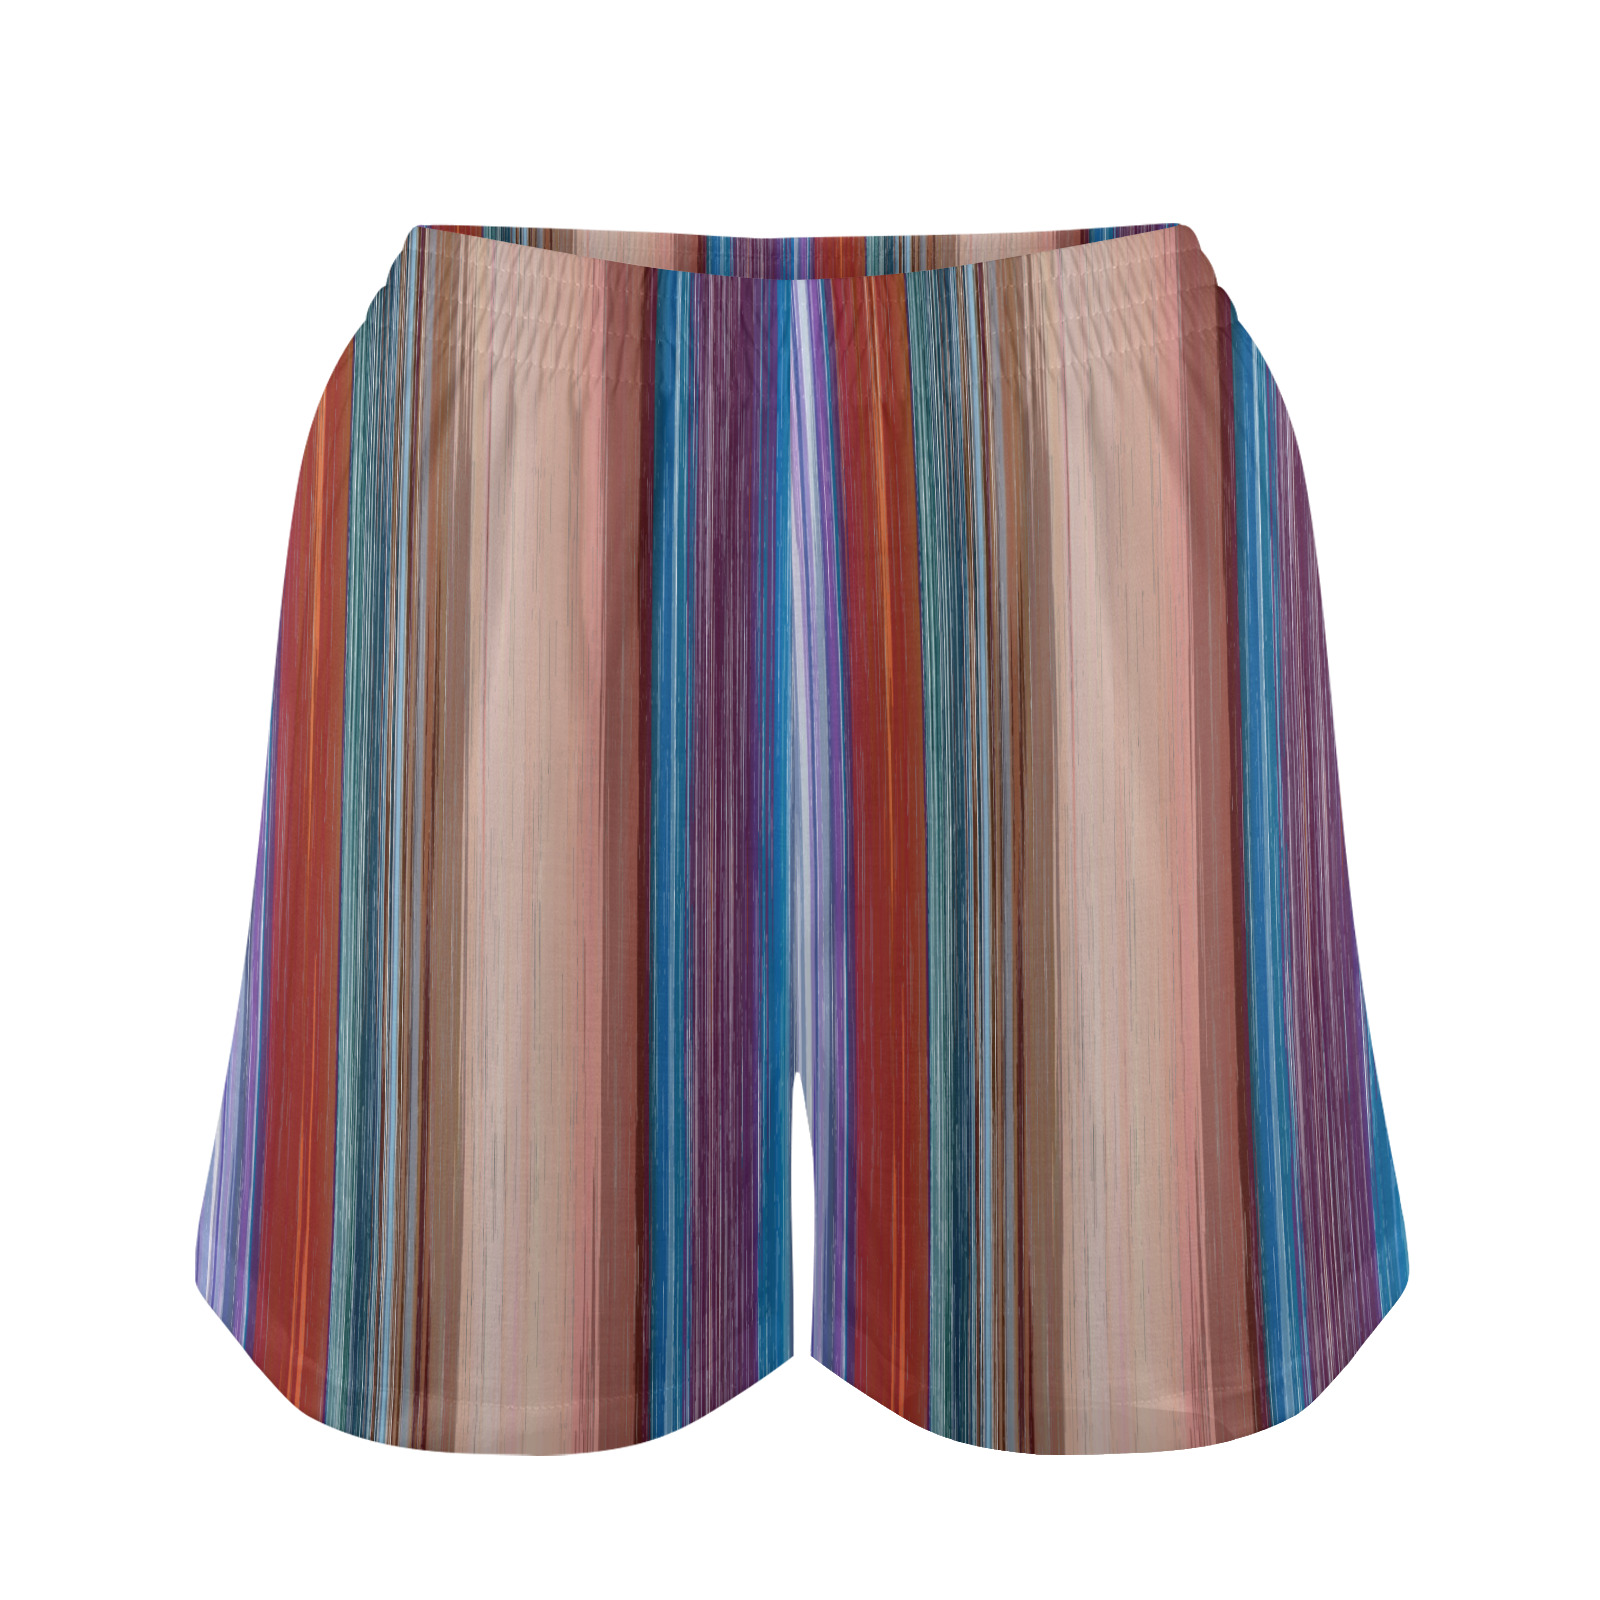 Altered Colours 1537 Women's Pajama Shorts